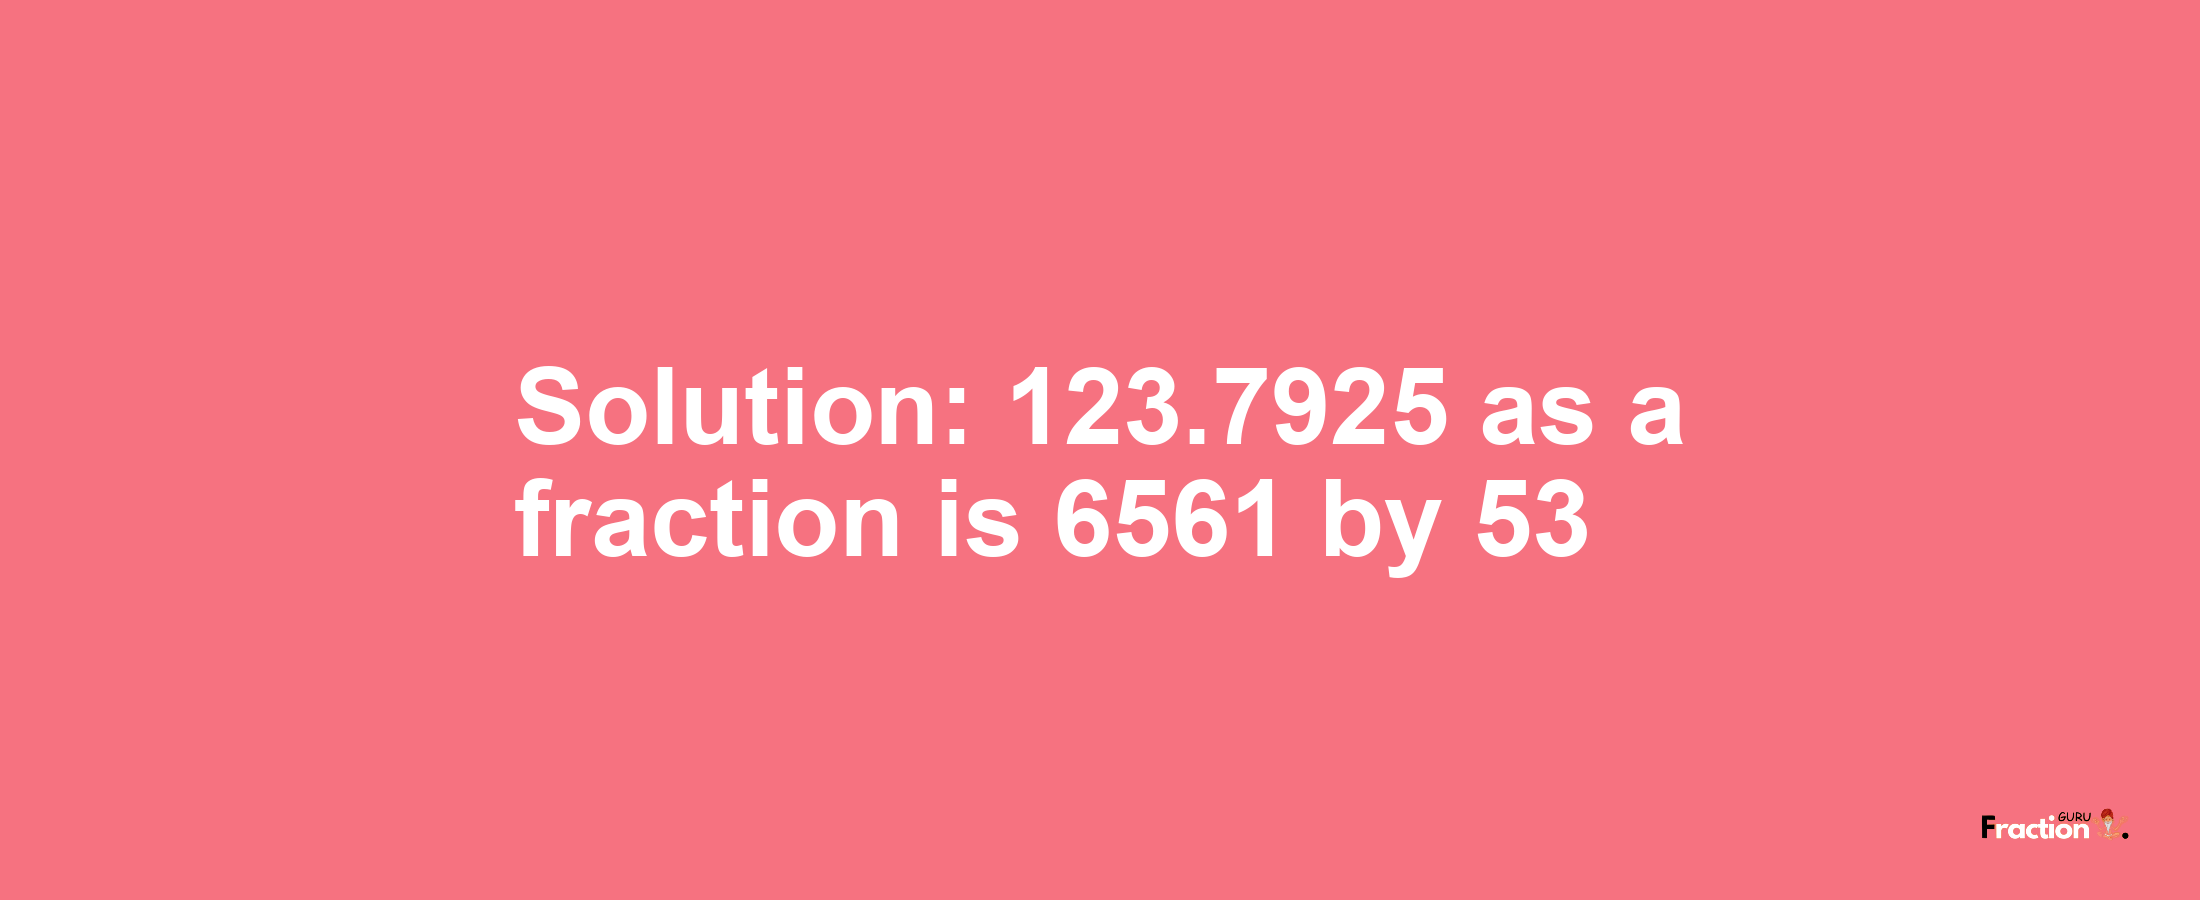 Solution:123.7925 as a fraction is 6561/53